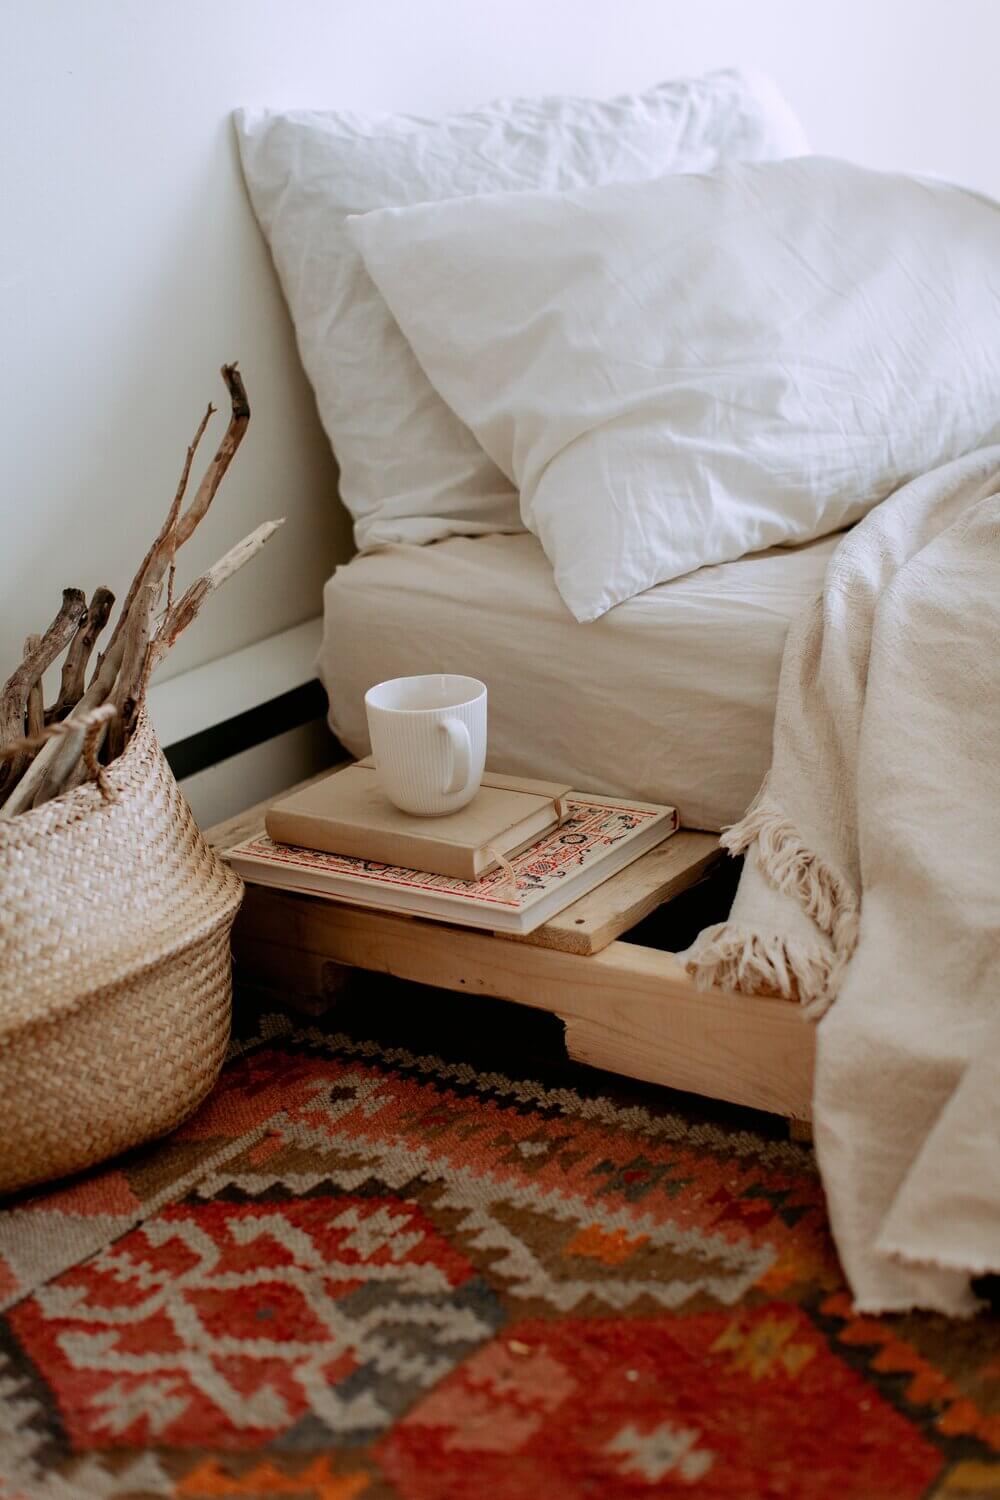 Bed with storage